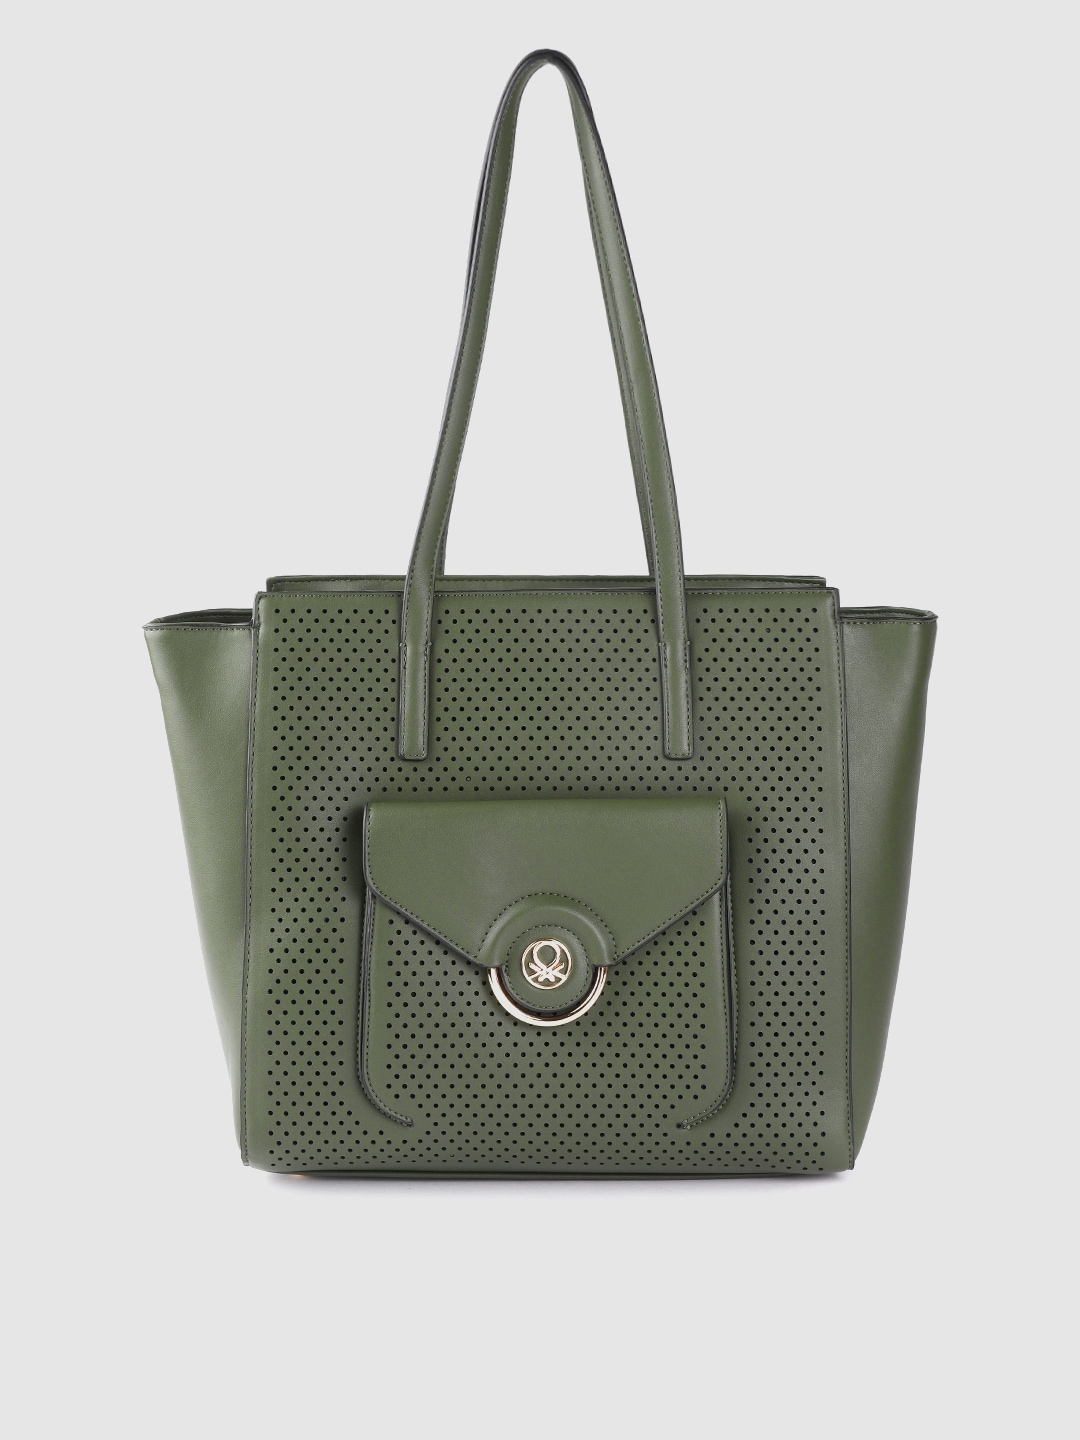 United Colors of Benetton Olive Green Laser Cut Swagger Shoulder Bag Price in India